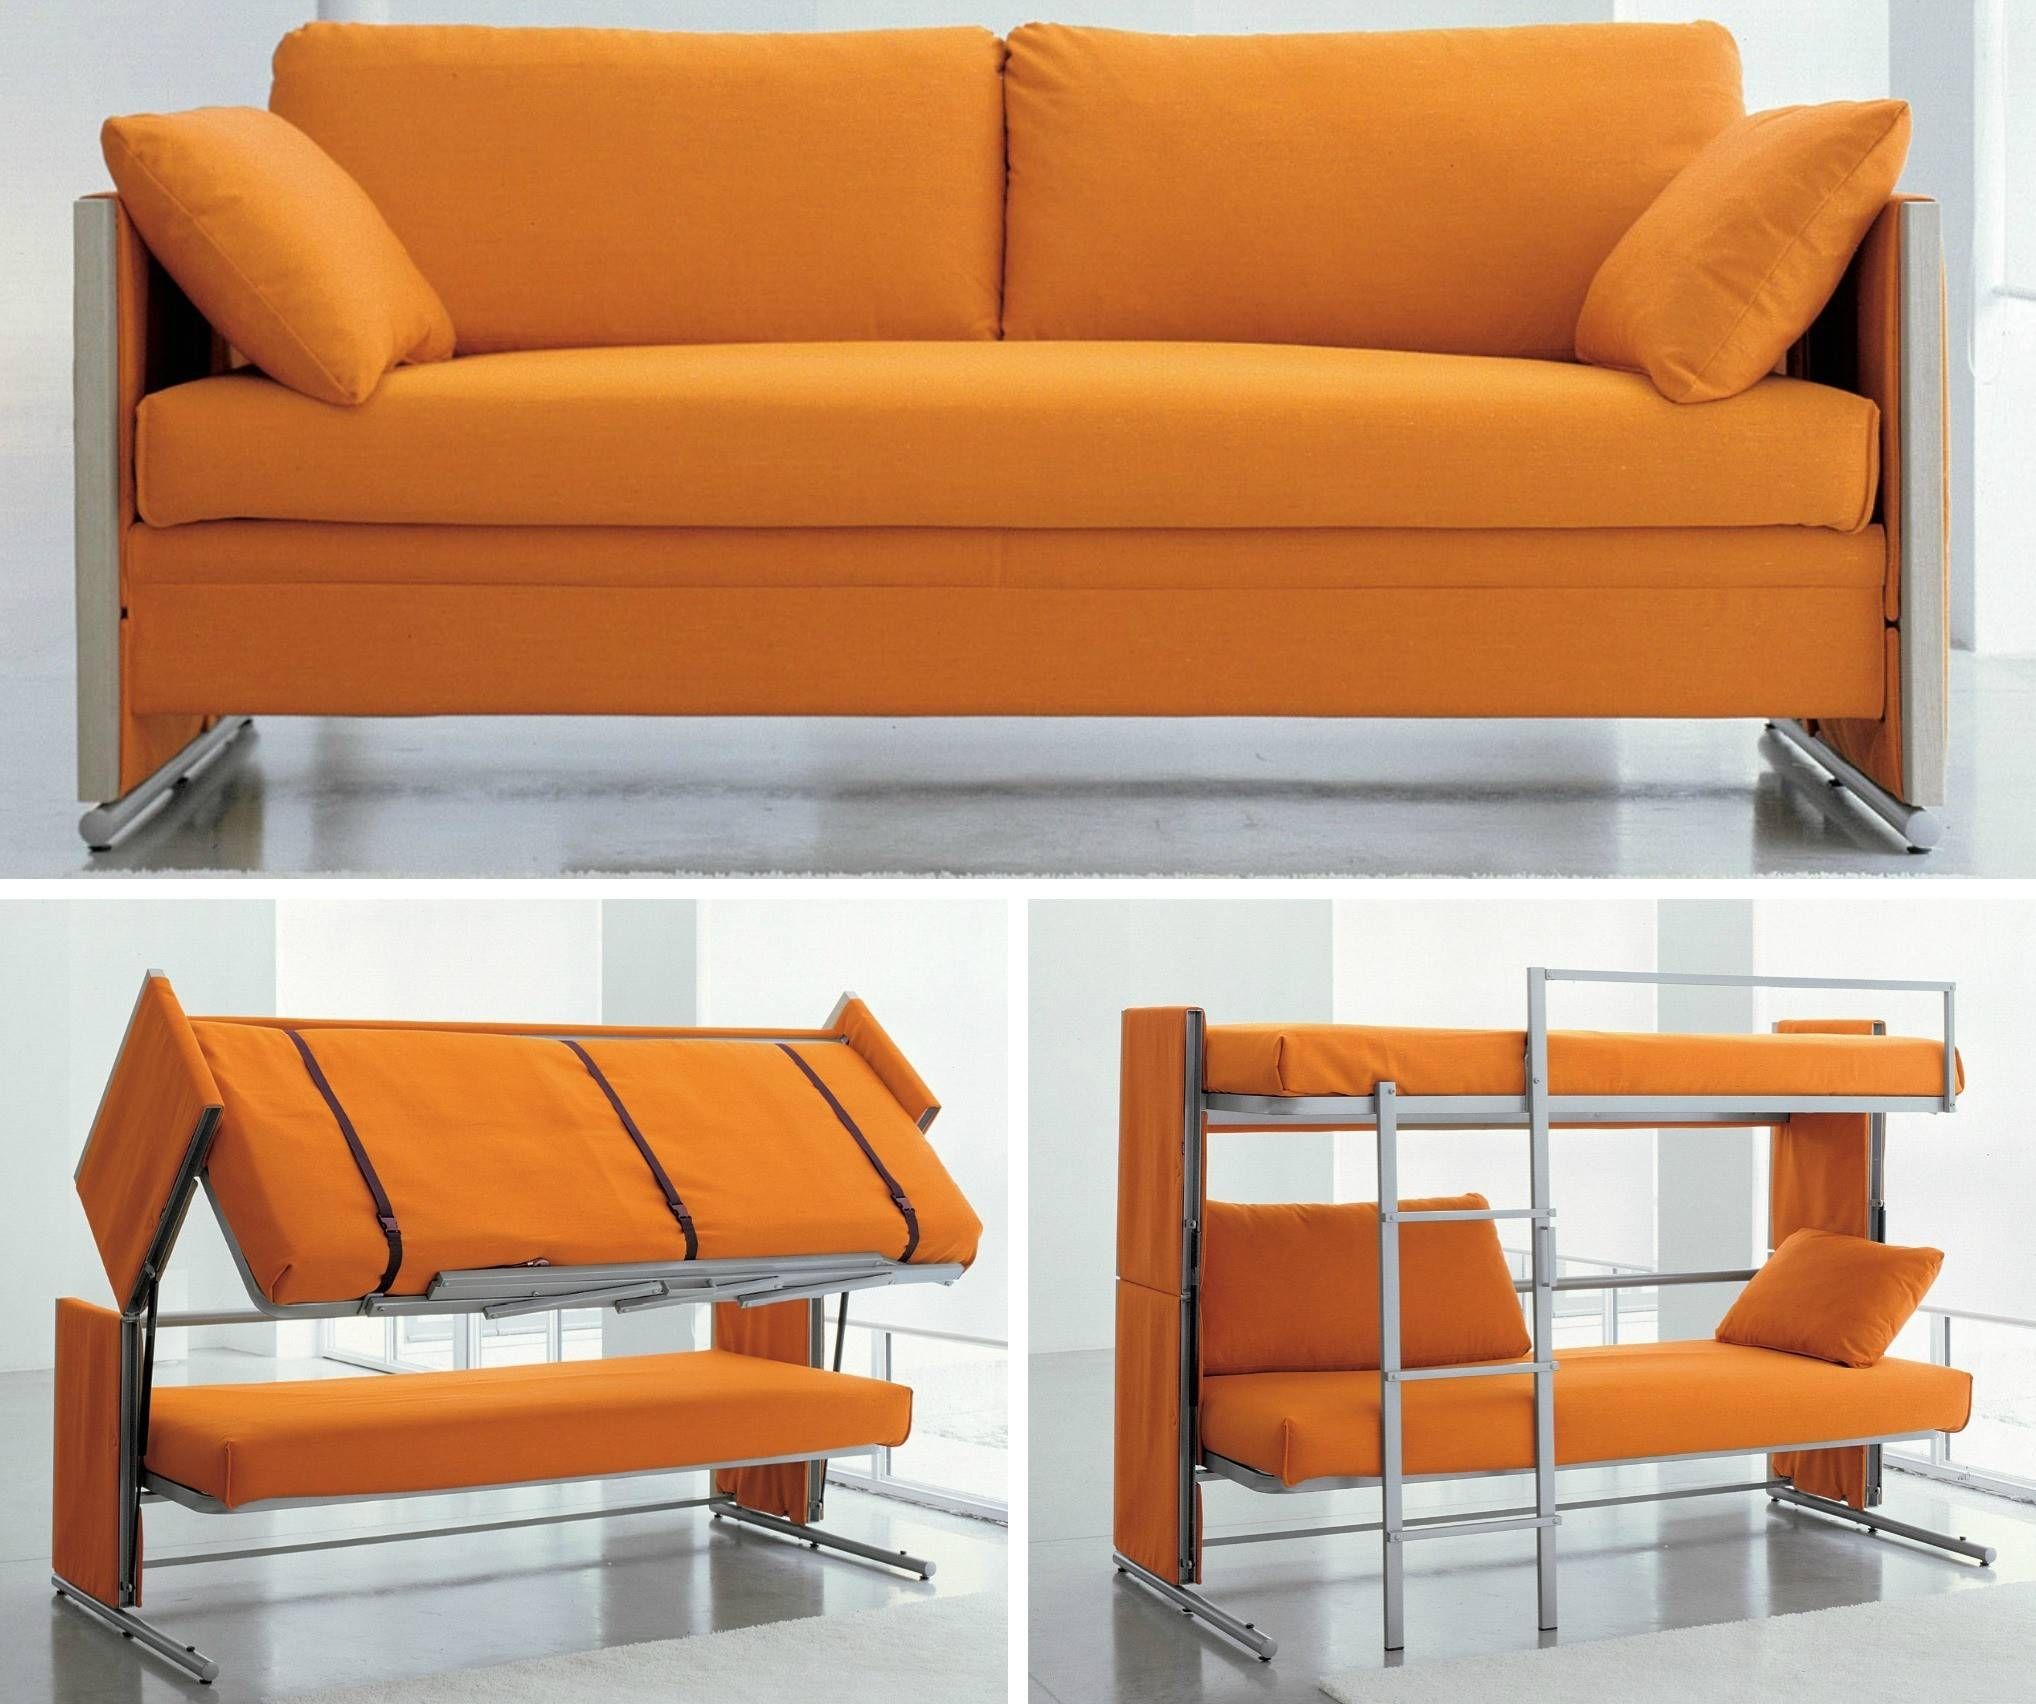 Sofa Converts To Bunk Beds 51 With Sofa Converts To Bunk Beds Within Sofas Converts To Bunk Bed (View 7 of 15)